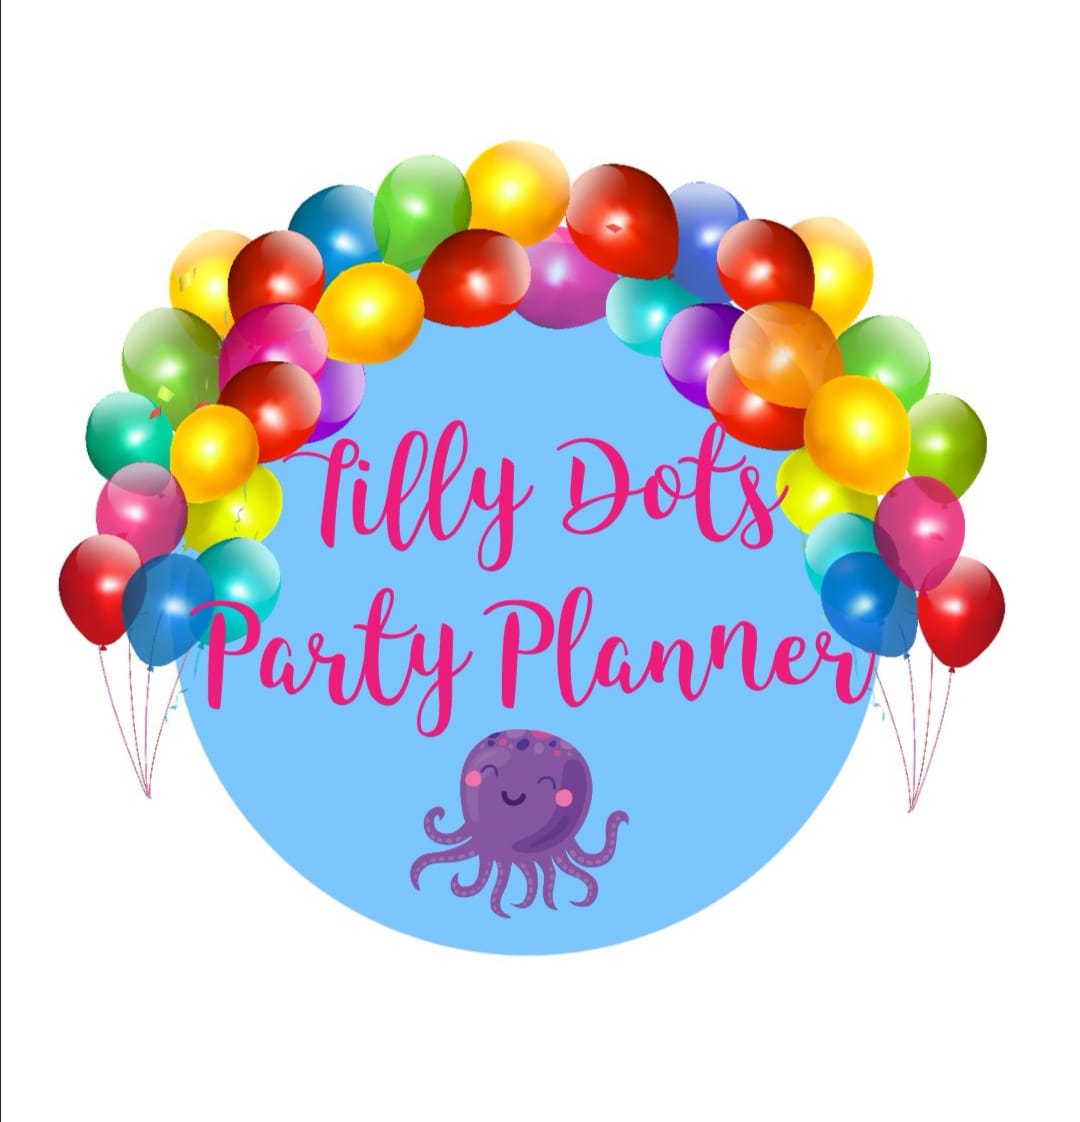 Tilly Dot Party Planner